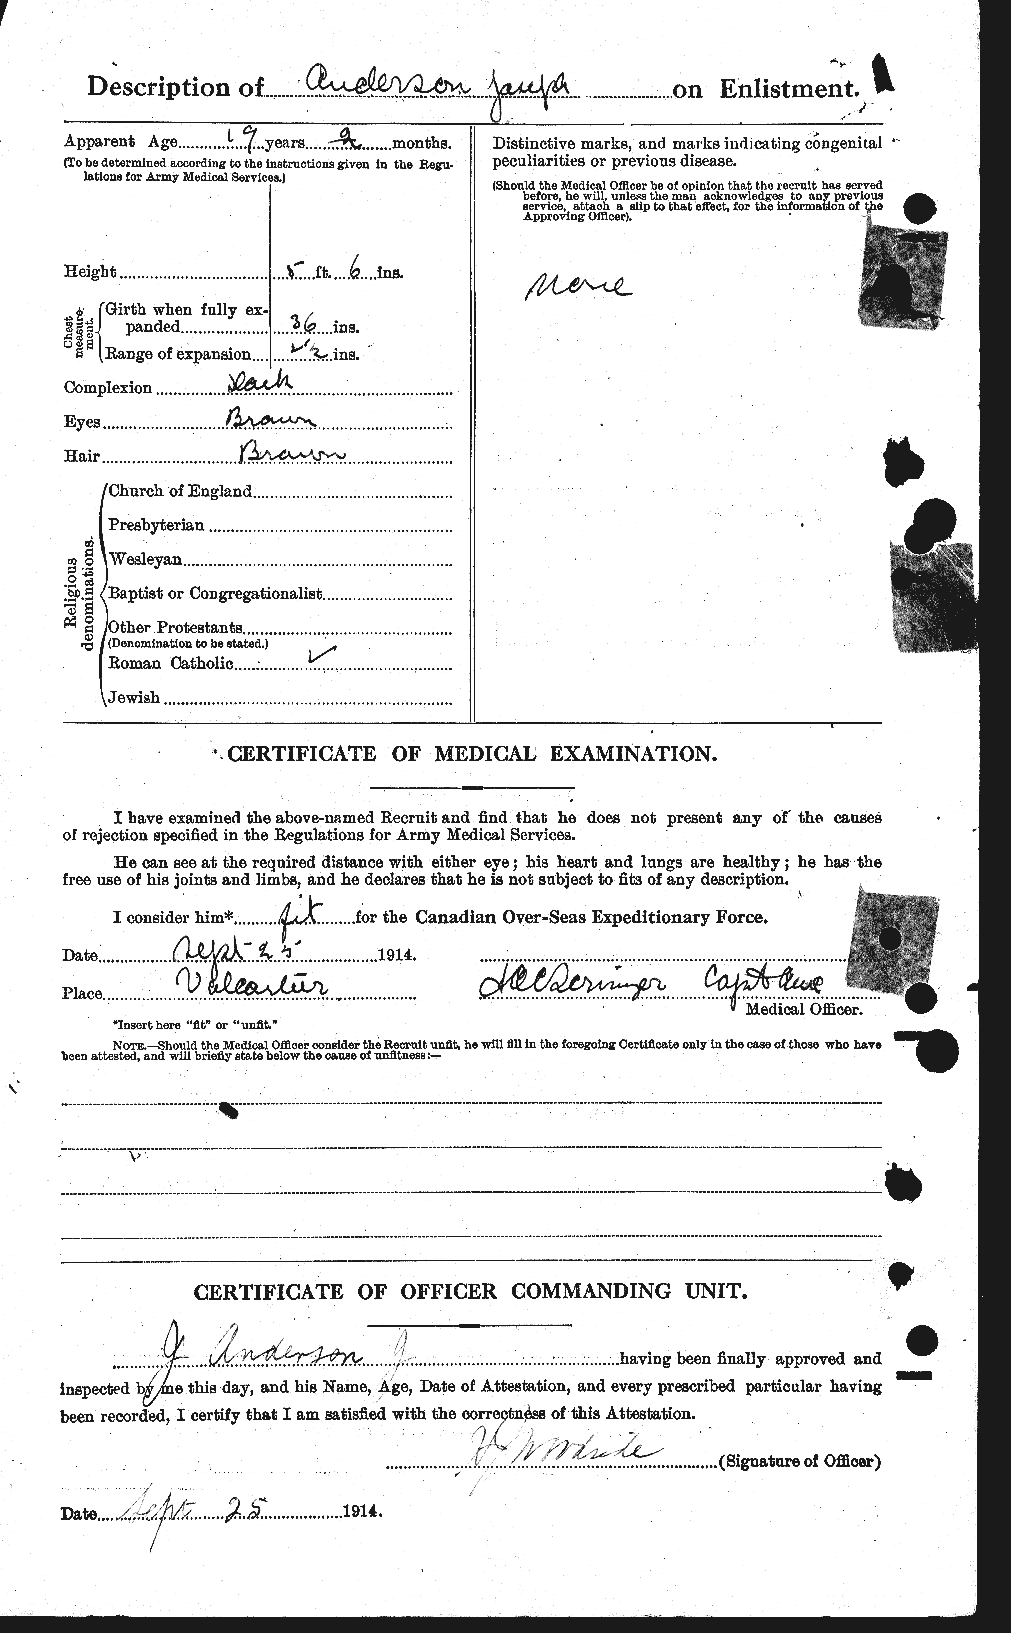 Personnel Records of the First World War - CEF 207575b